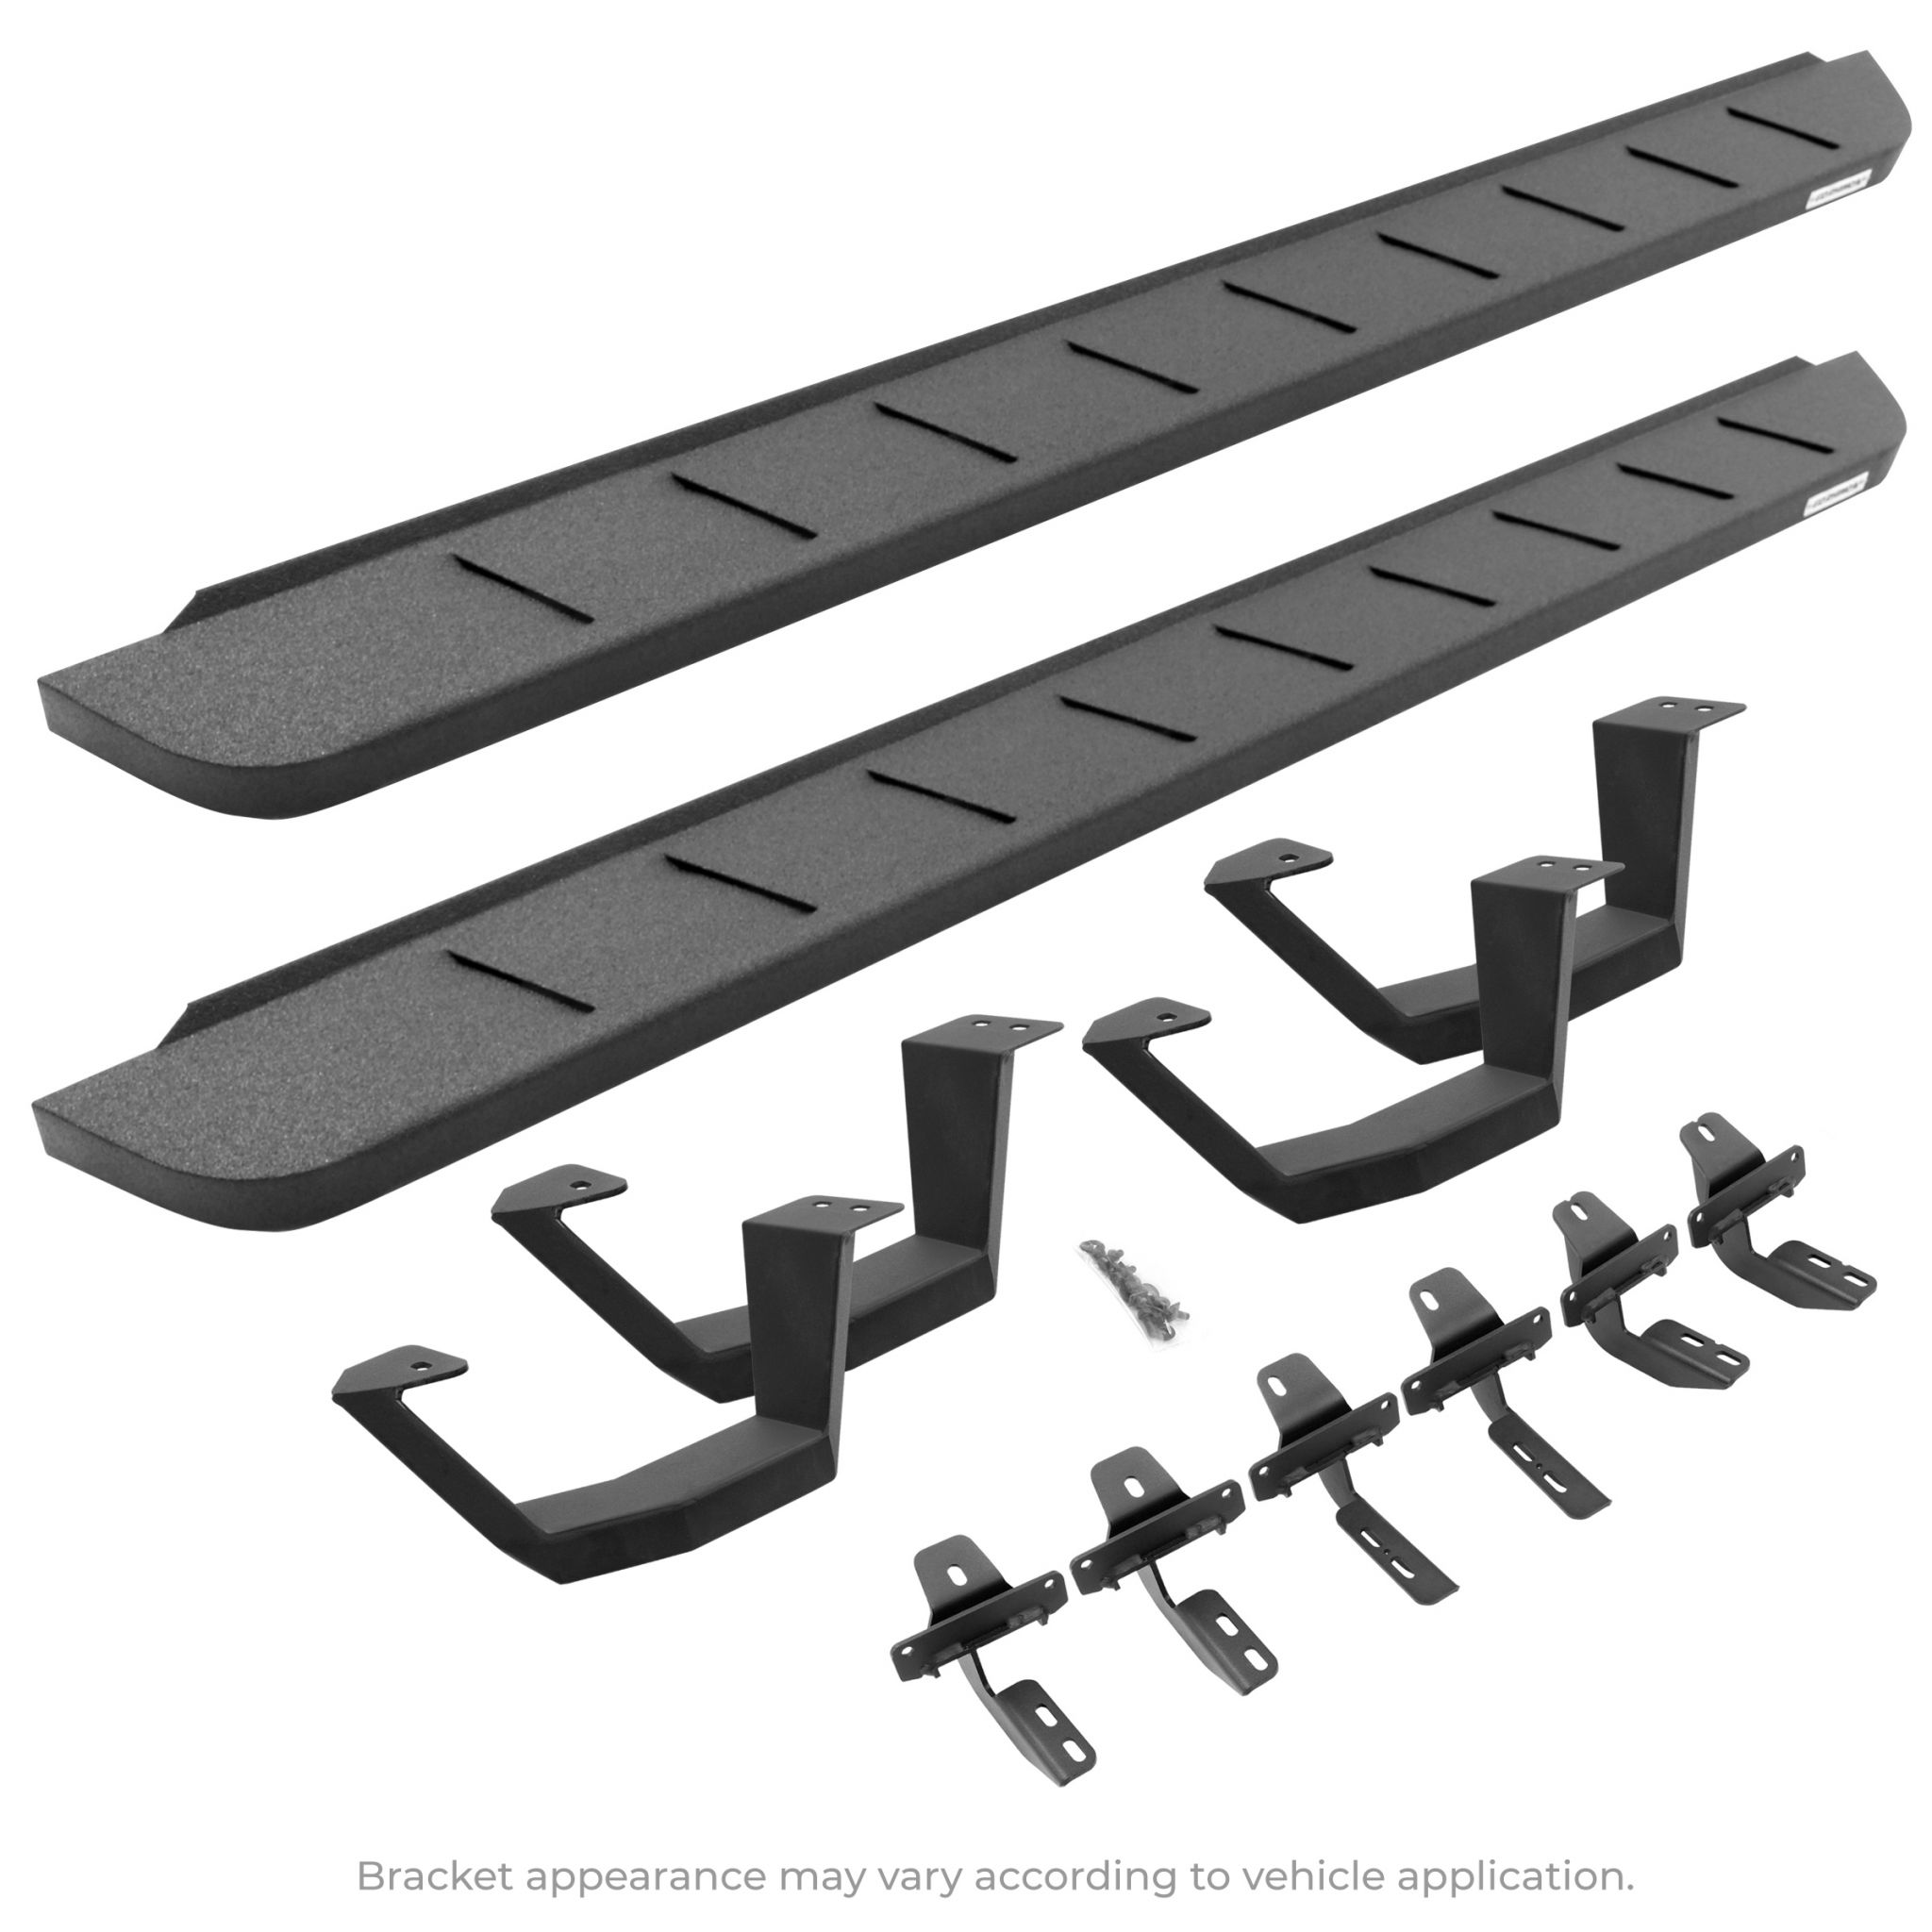 Go Rhino 6344158020T - RB10 Running Boards With Mounting Brackets & 2 Pairs of Drop Steps Kit - Protective Bedliner Coating